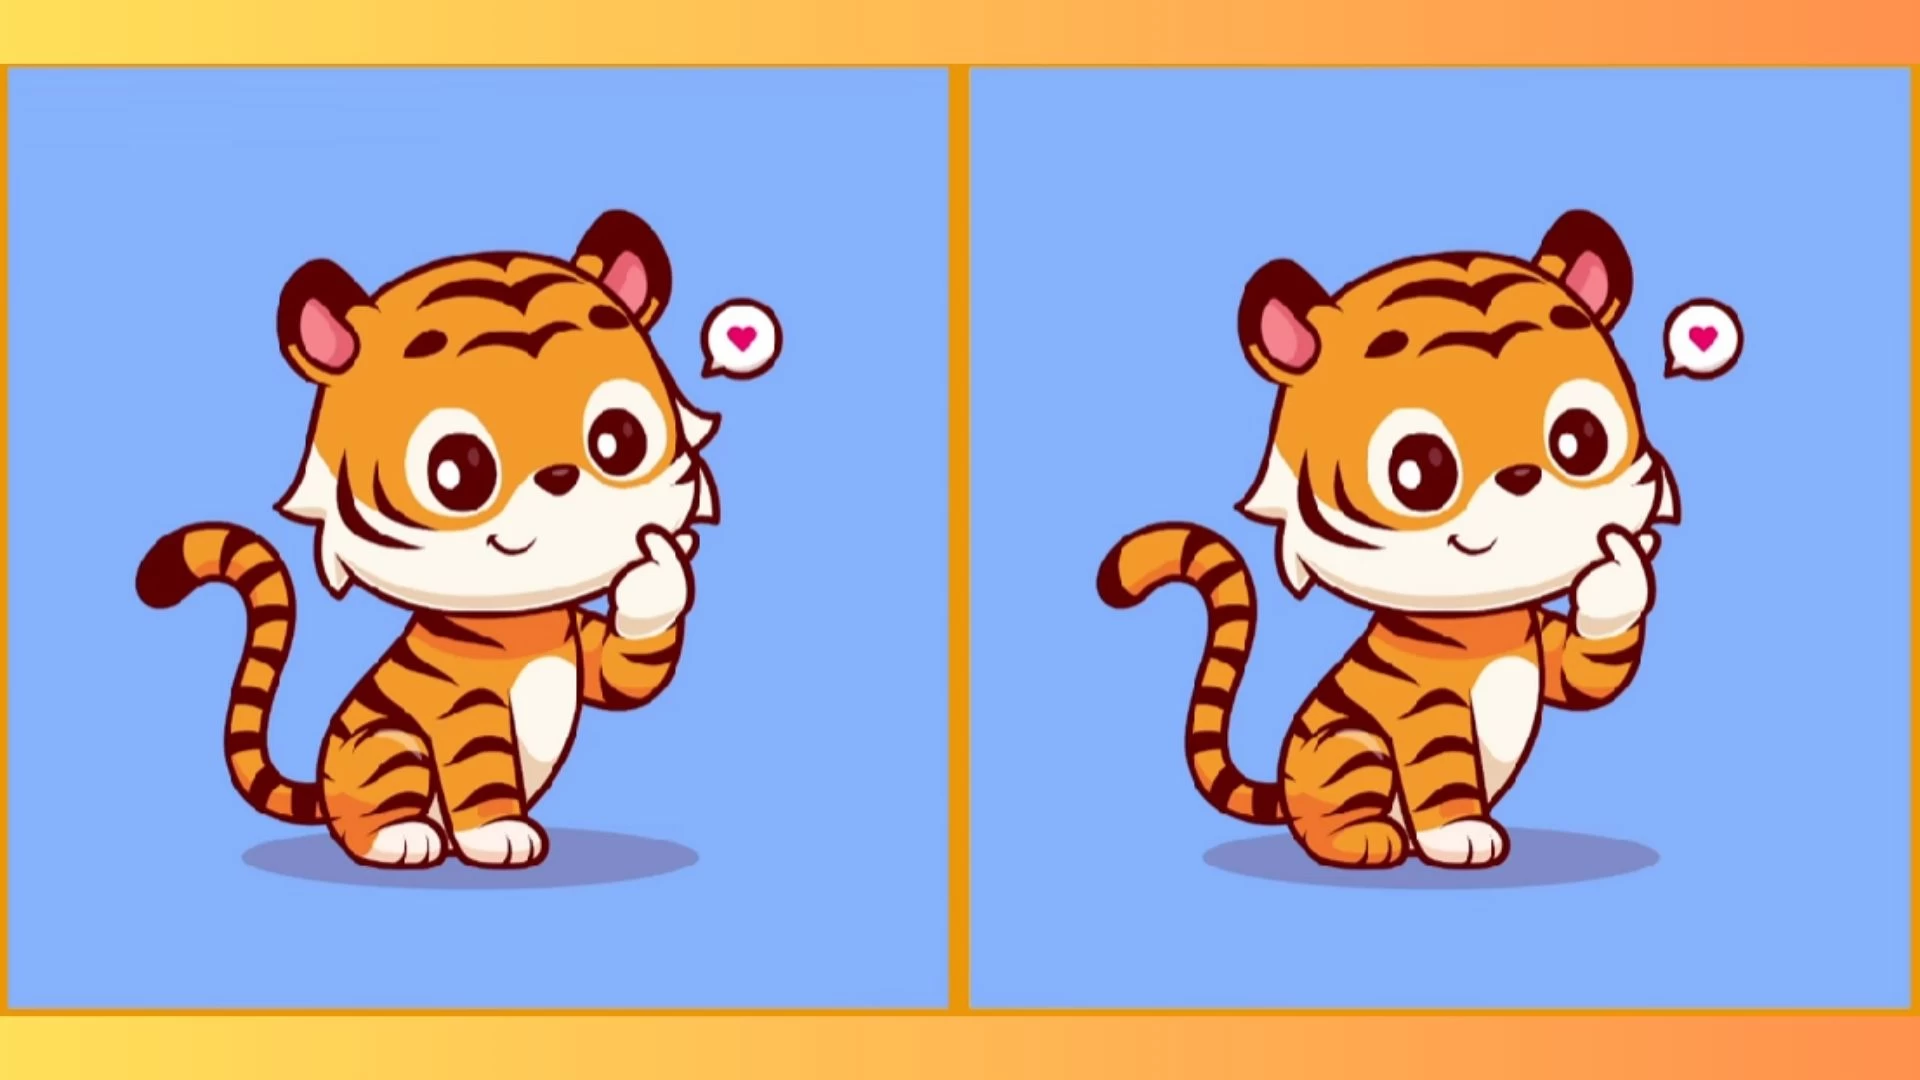 Prove yourself by finding 3 differences between the Cat pictures in 15 seconds